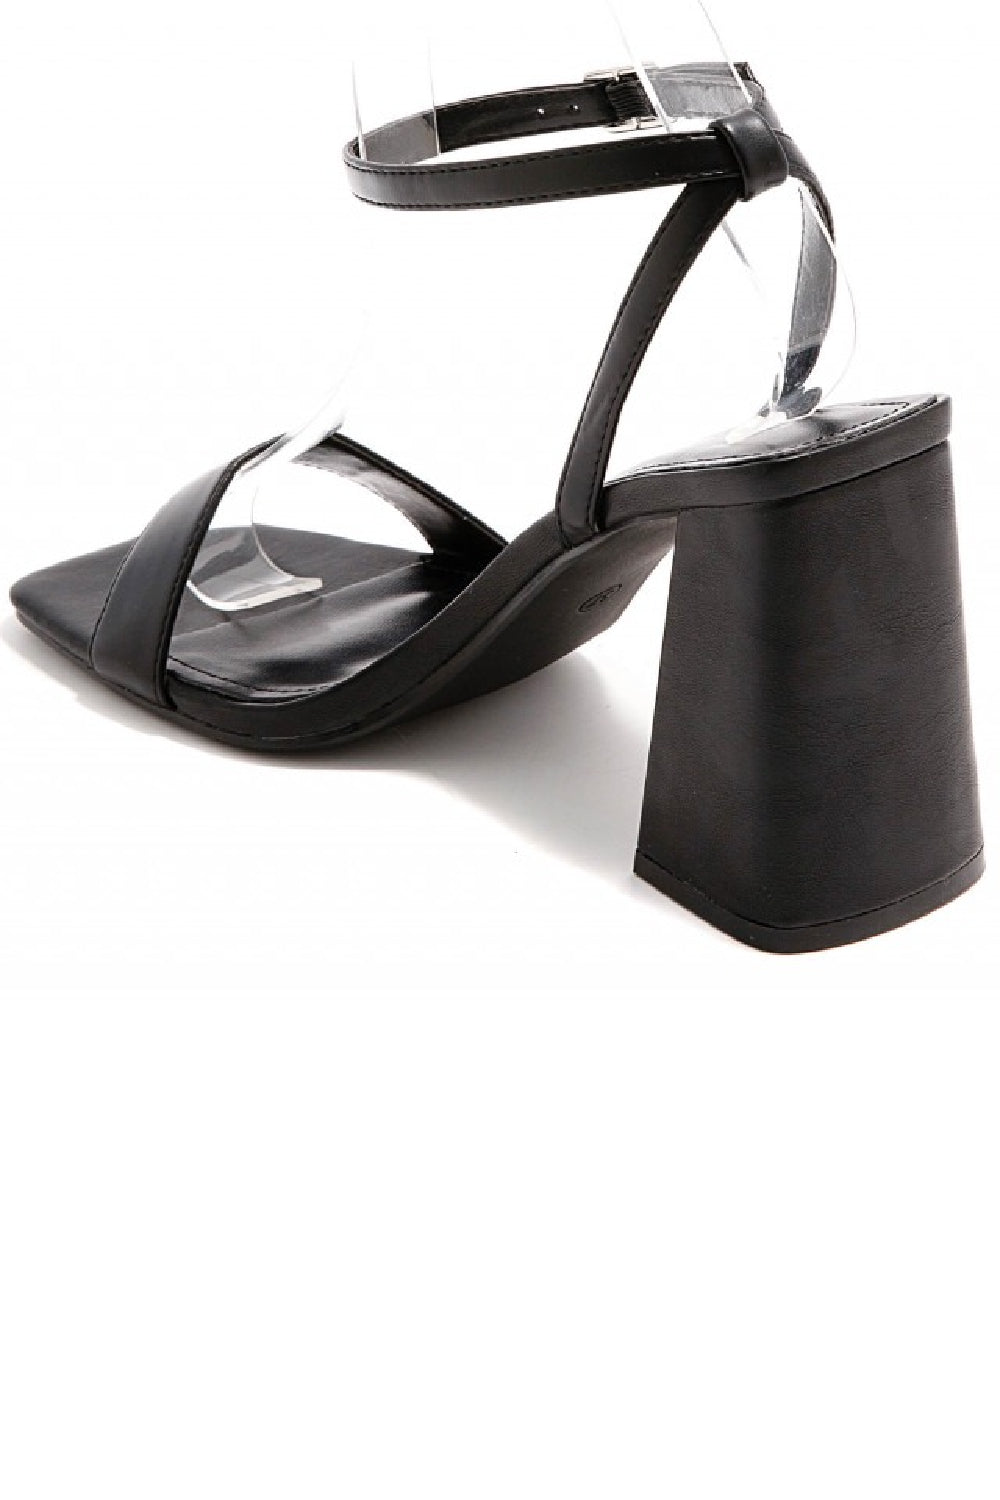 BLACK BLOCK HEELED STRAPPY PARTY SANDALS